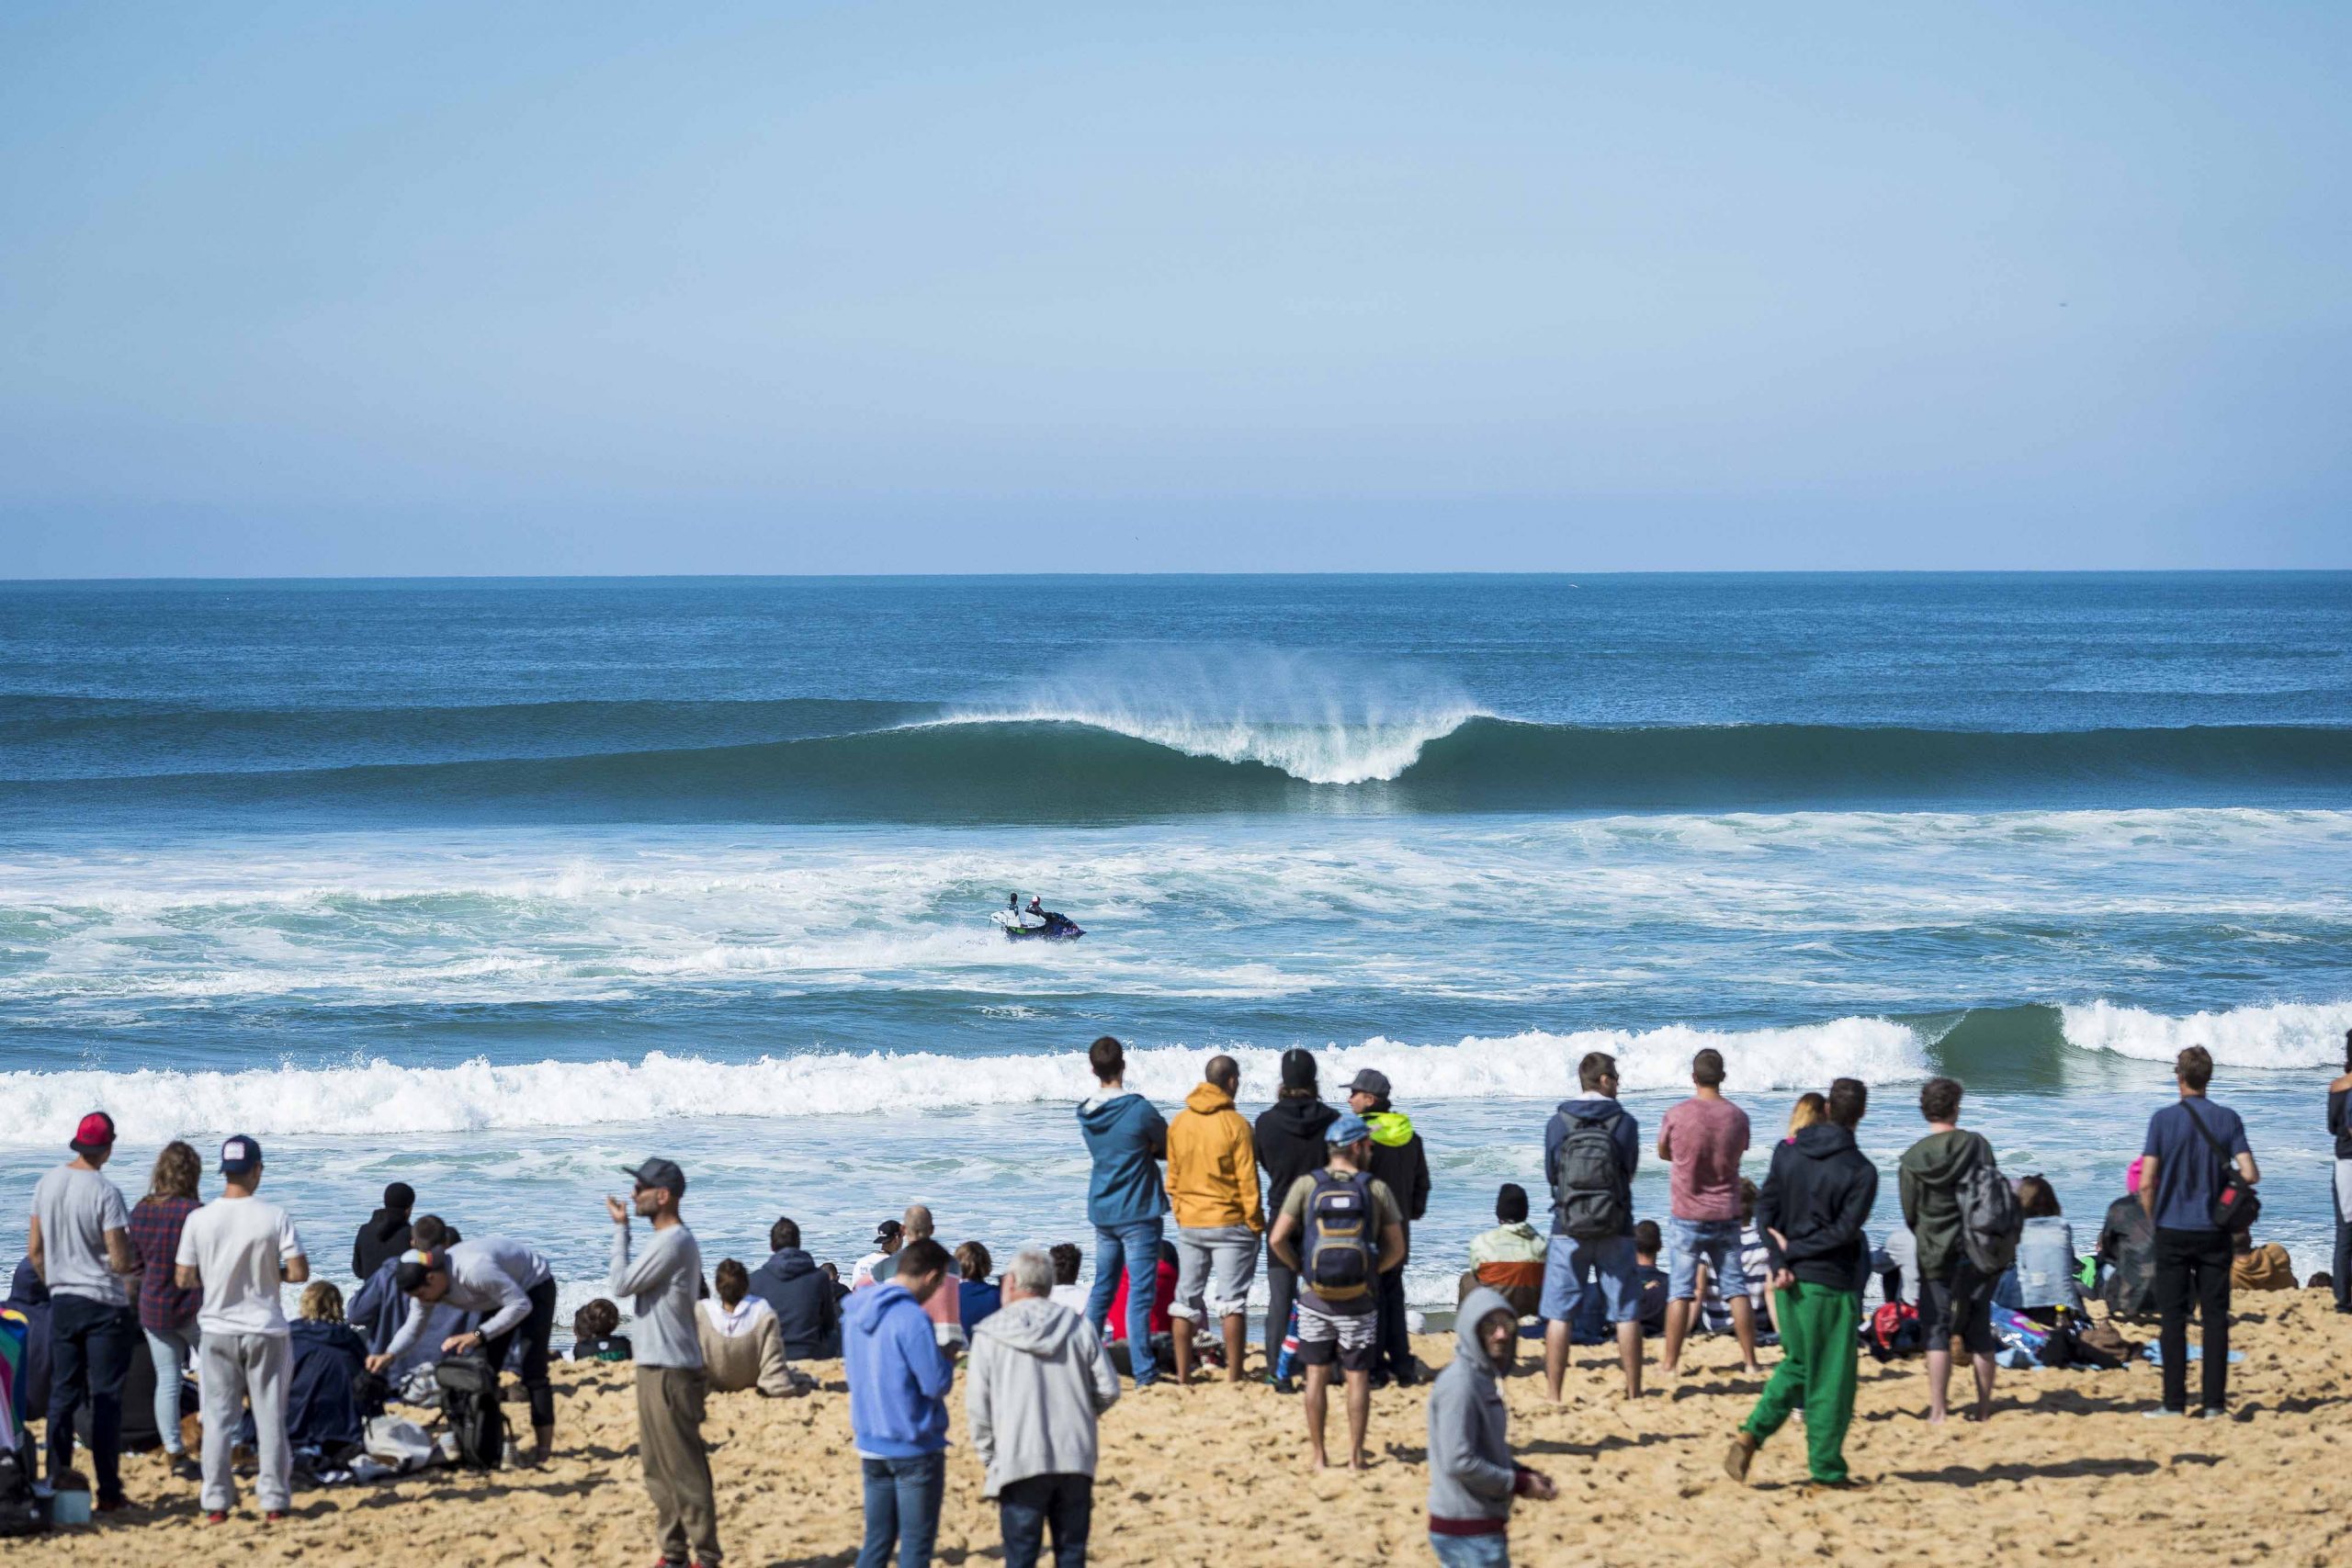 Quiksilver and ROXY Pro France